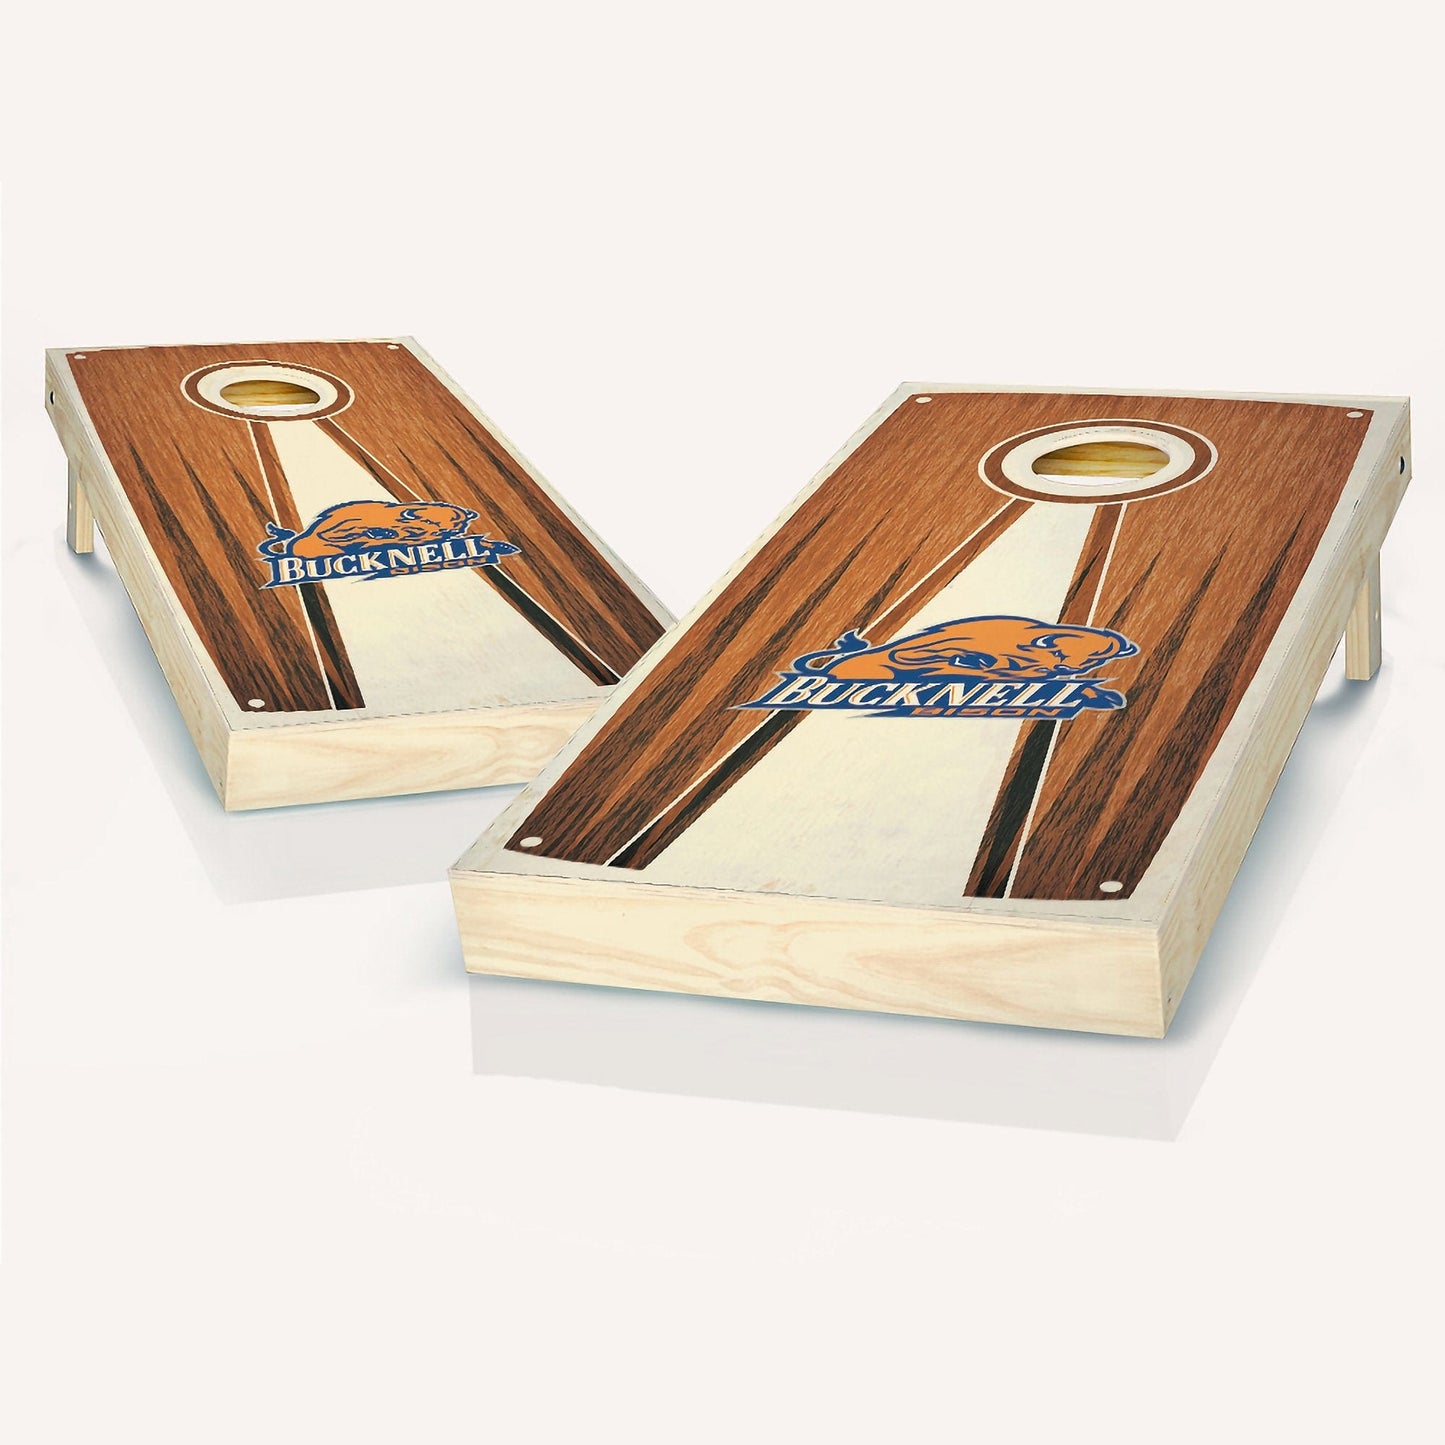 Bucknell Stained Pyramid Cornhole Boards